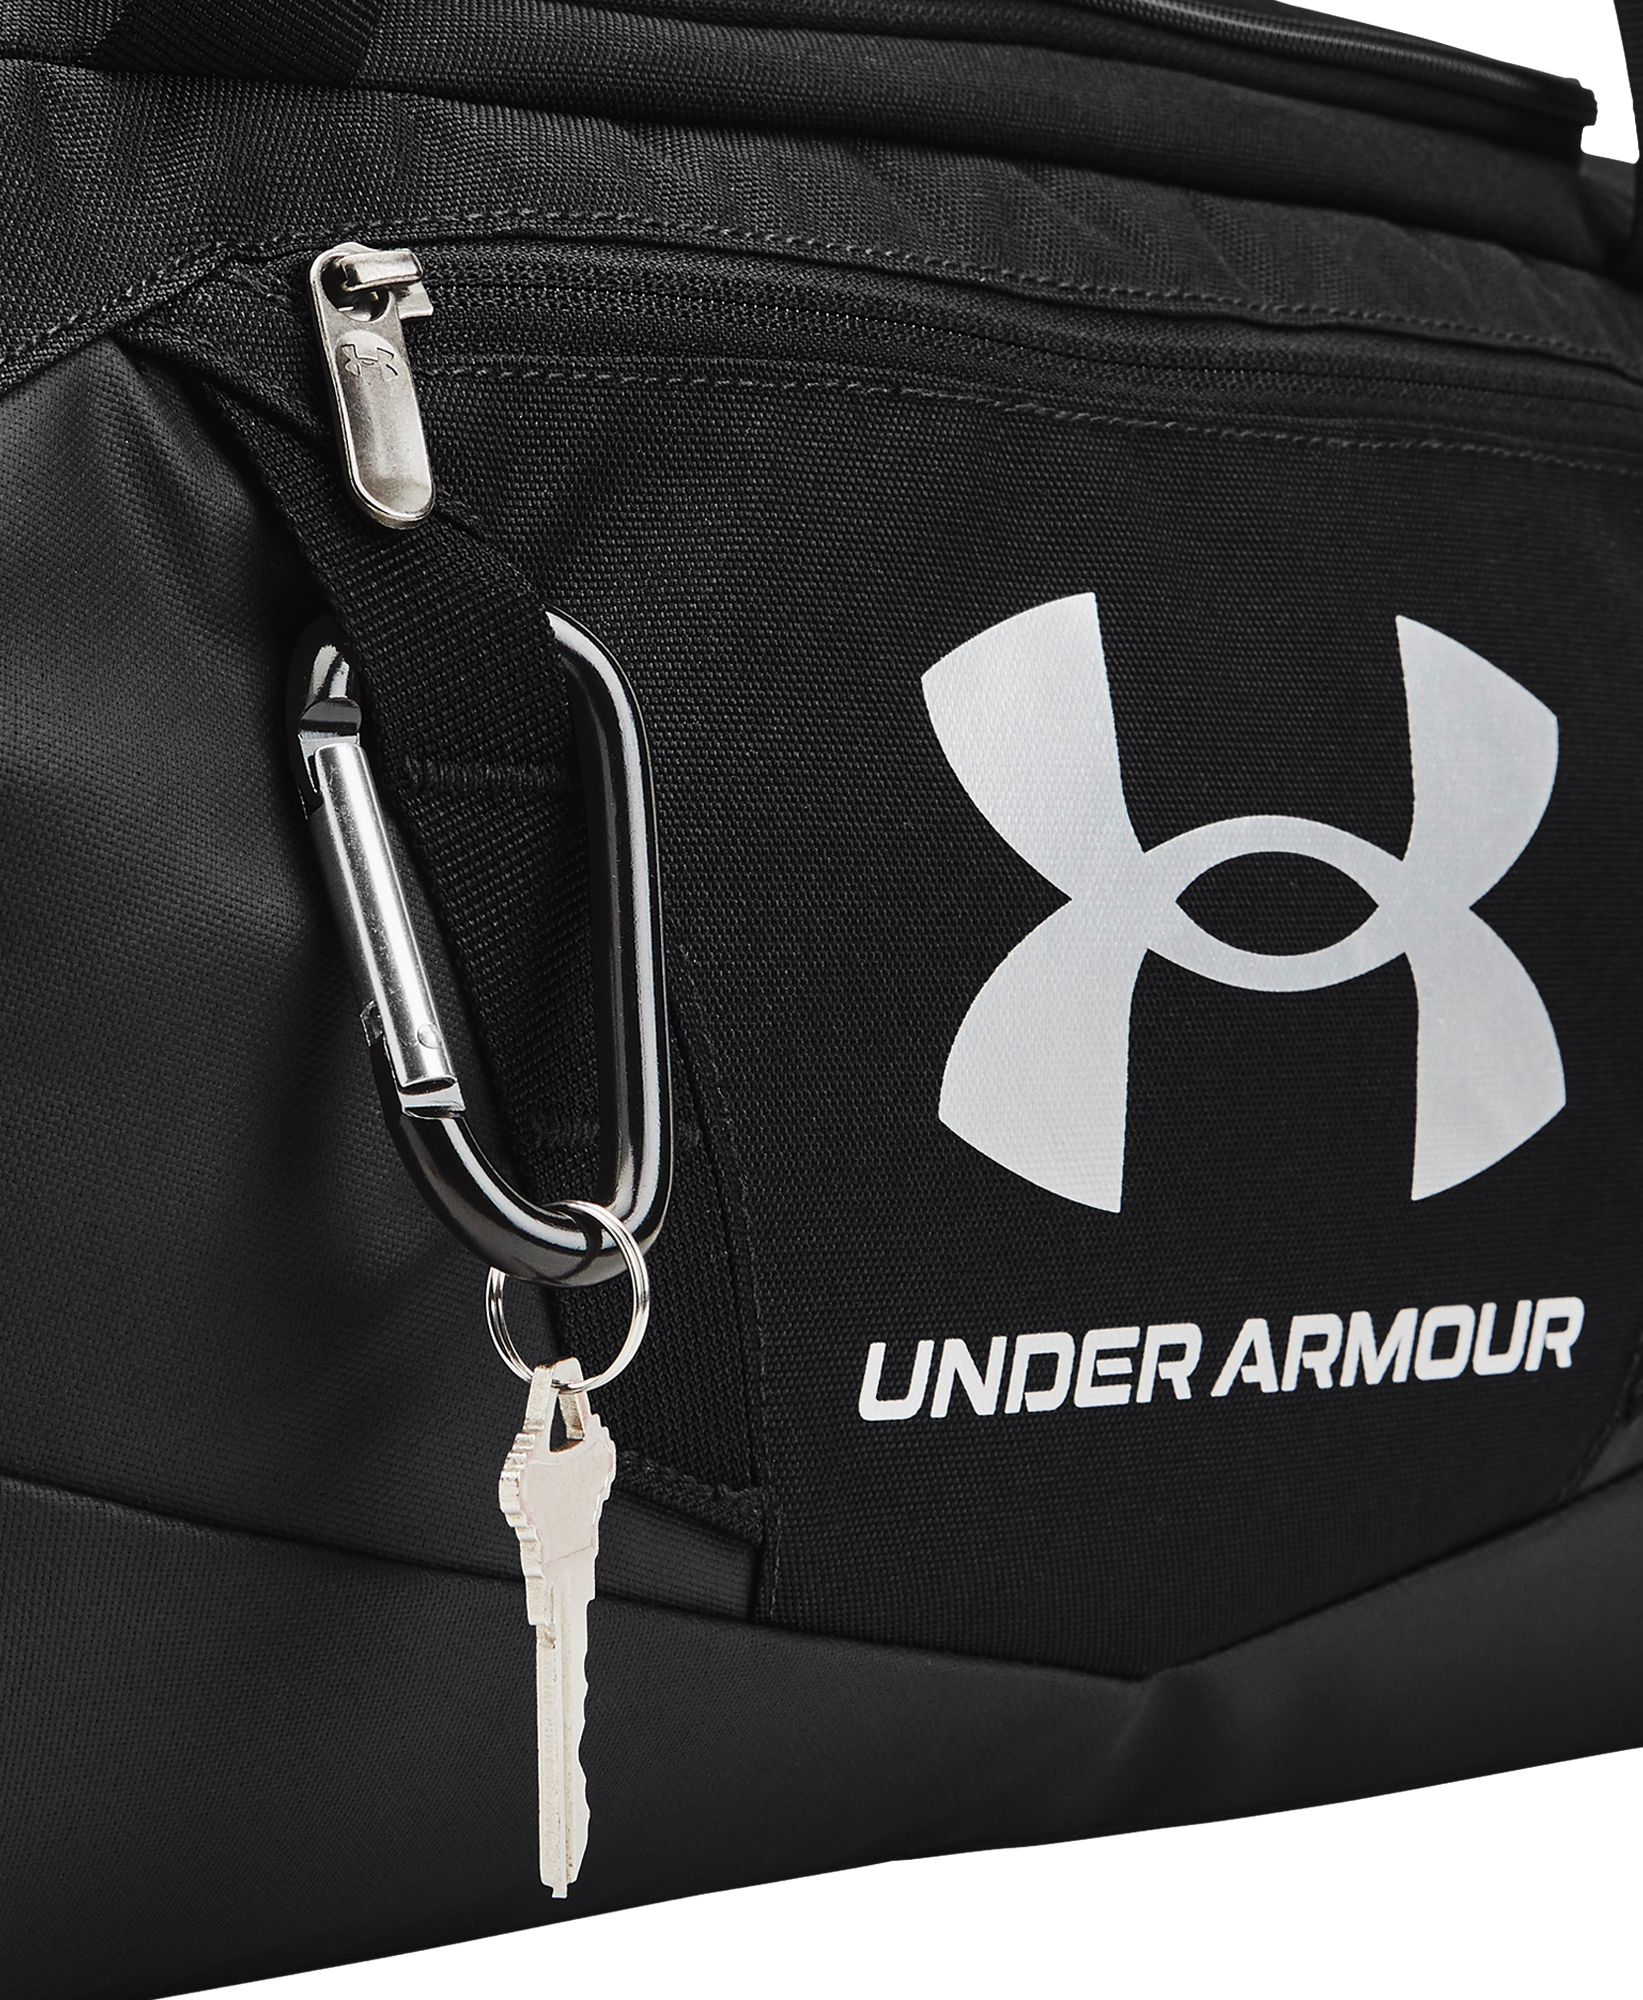 Under Armour Undeniable Duffel 5.0 Small